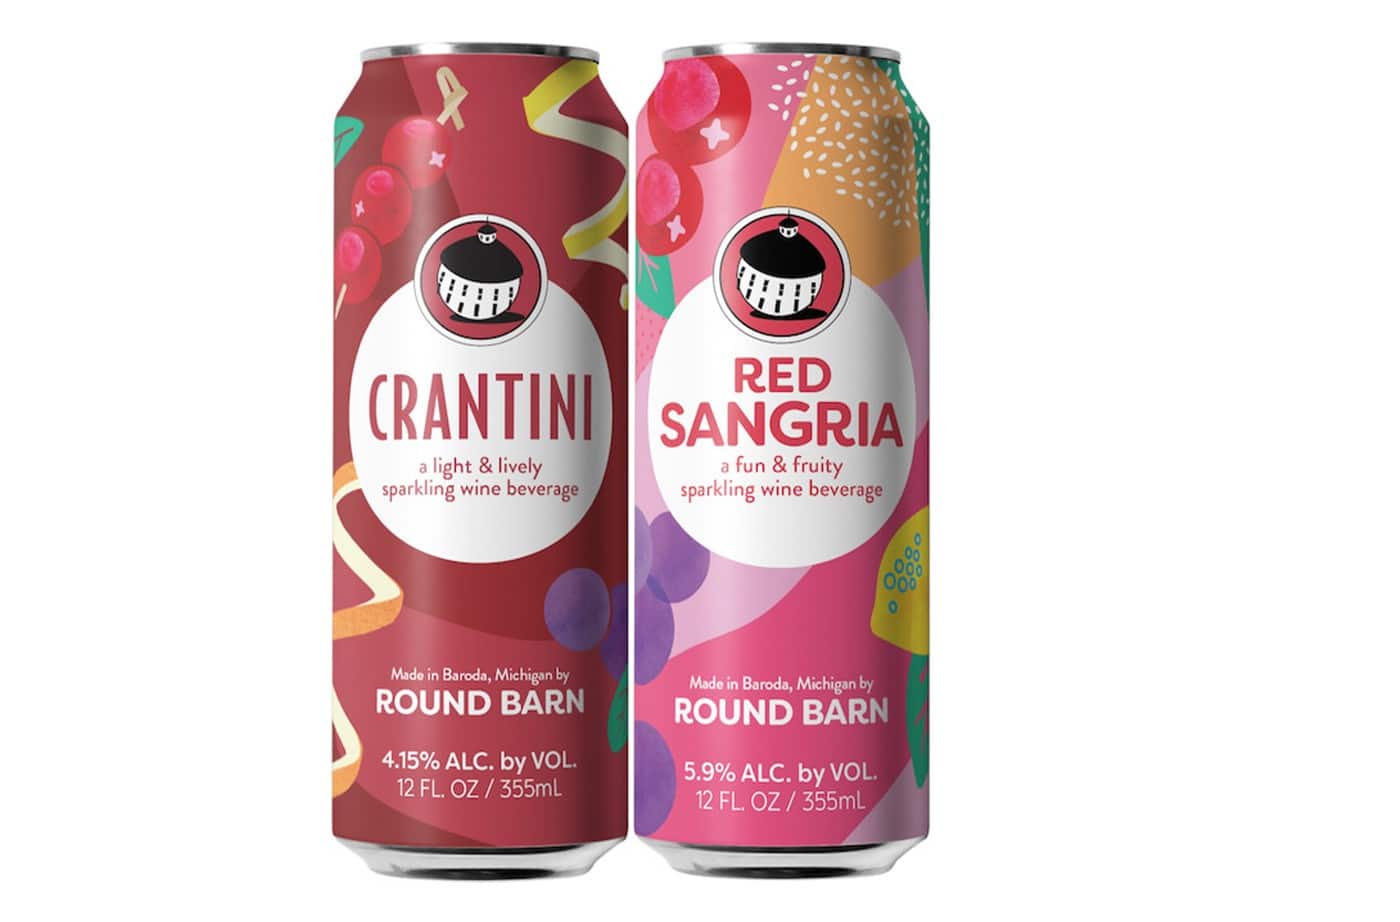 Round Barn Winery Taps into the Canned Wine Market with 4 New Offerings